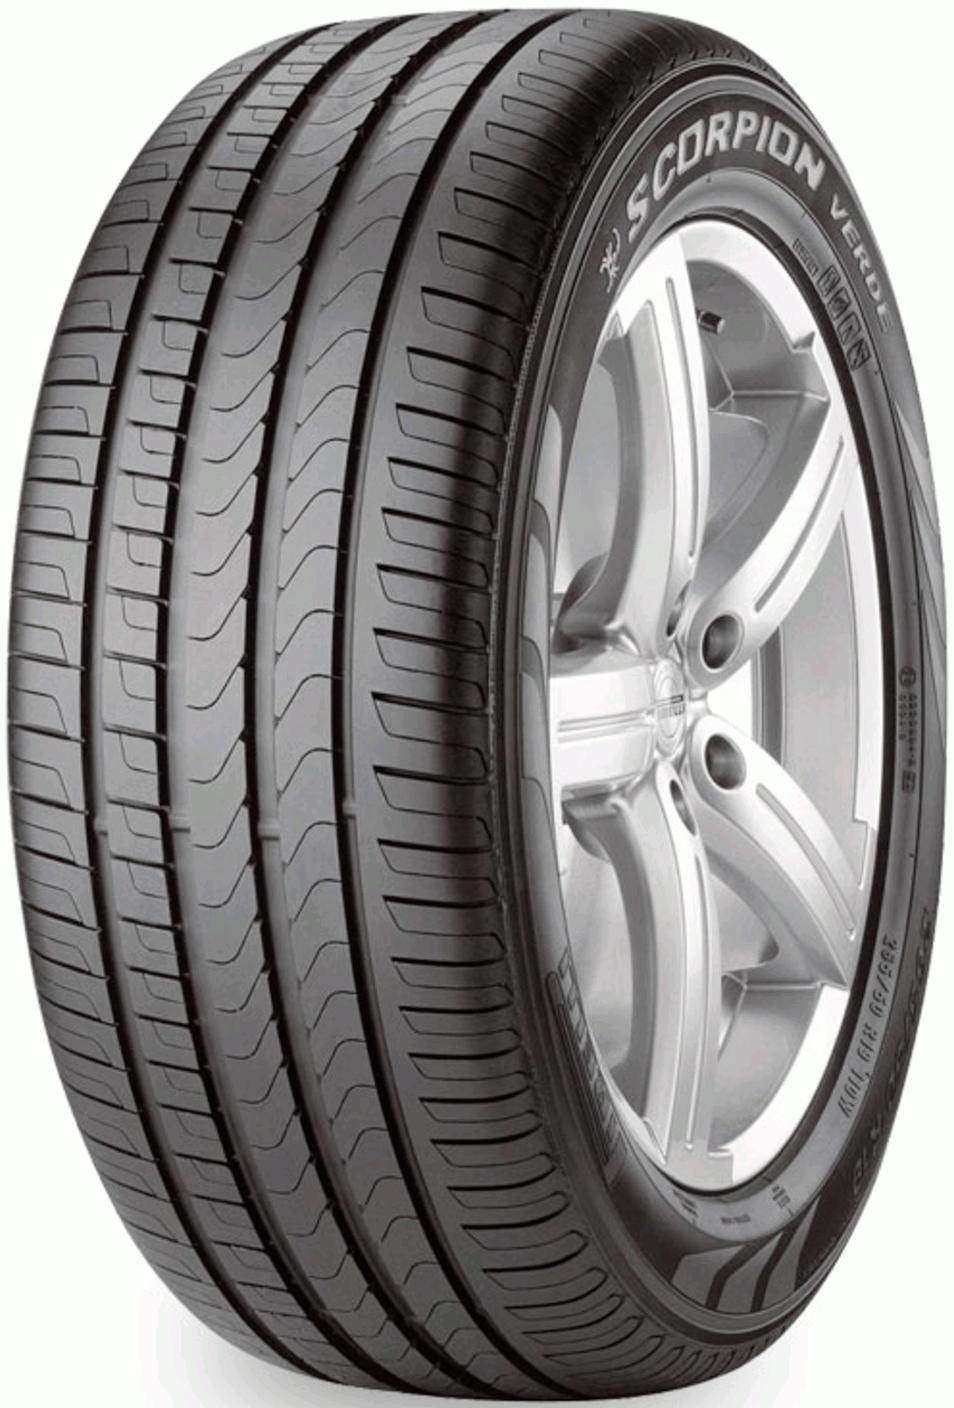 Pirelli Scorpion Verde - Tire Reviews and Tests